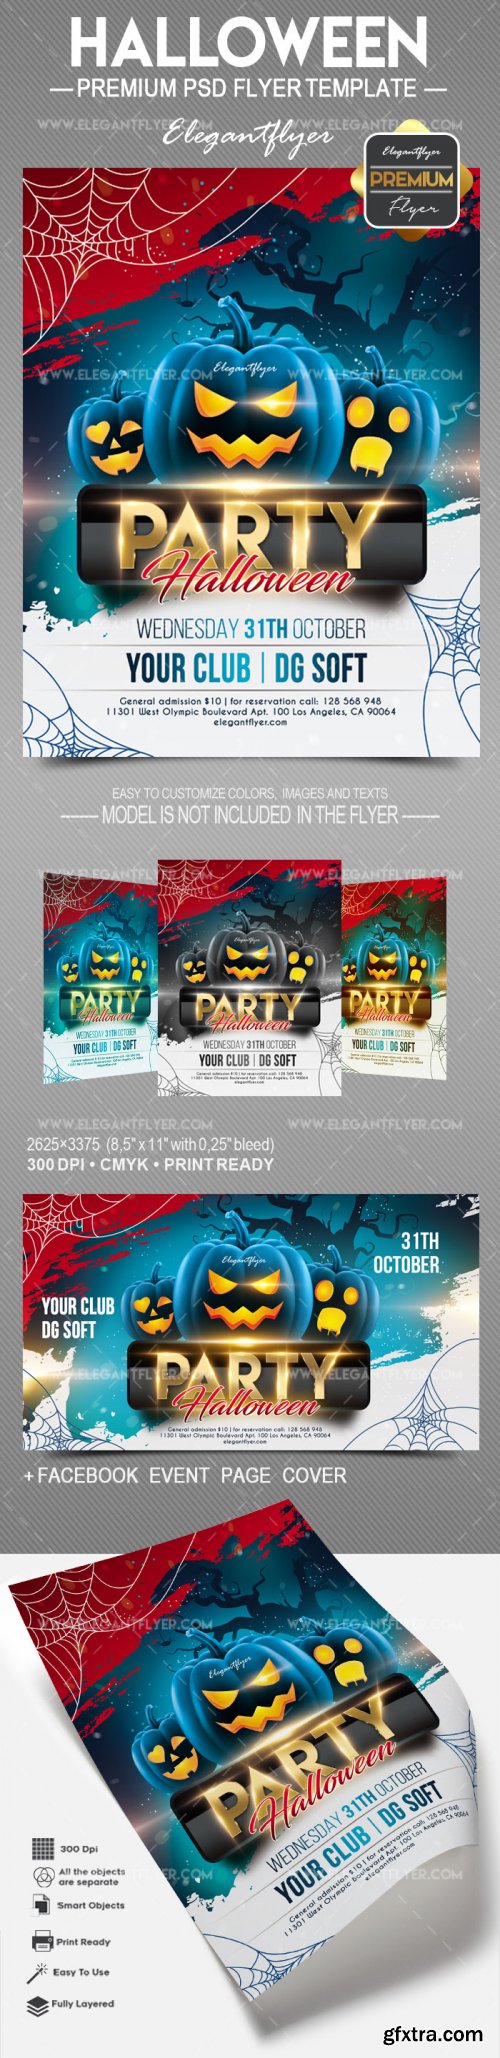 Halloween Party V1 2018 Flyer PSD Template